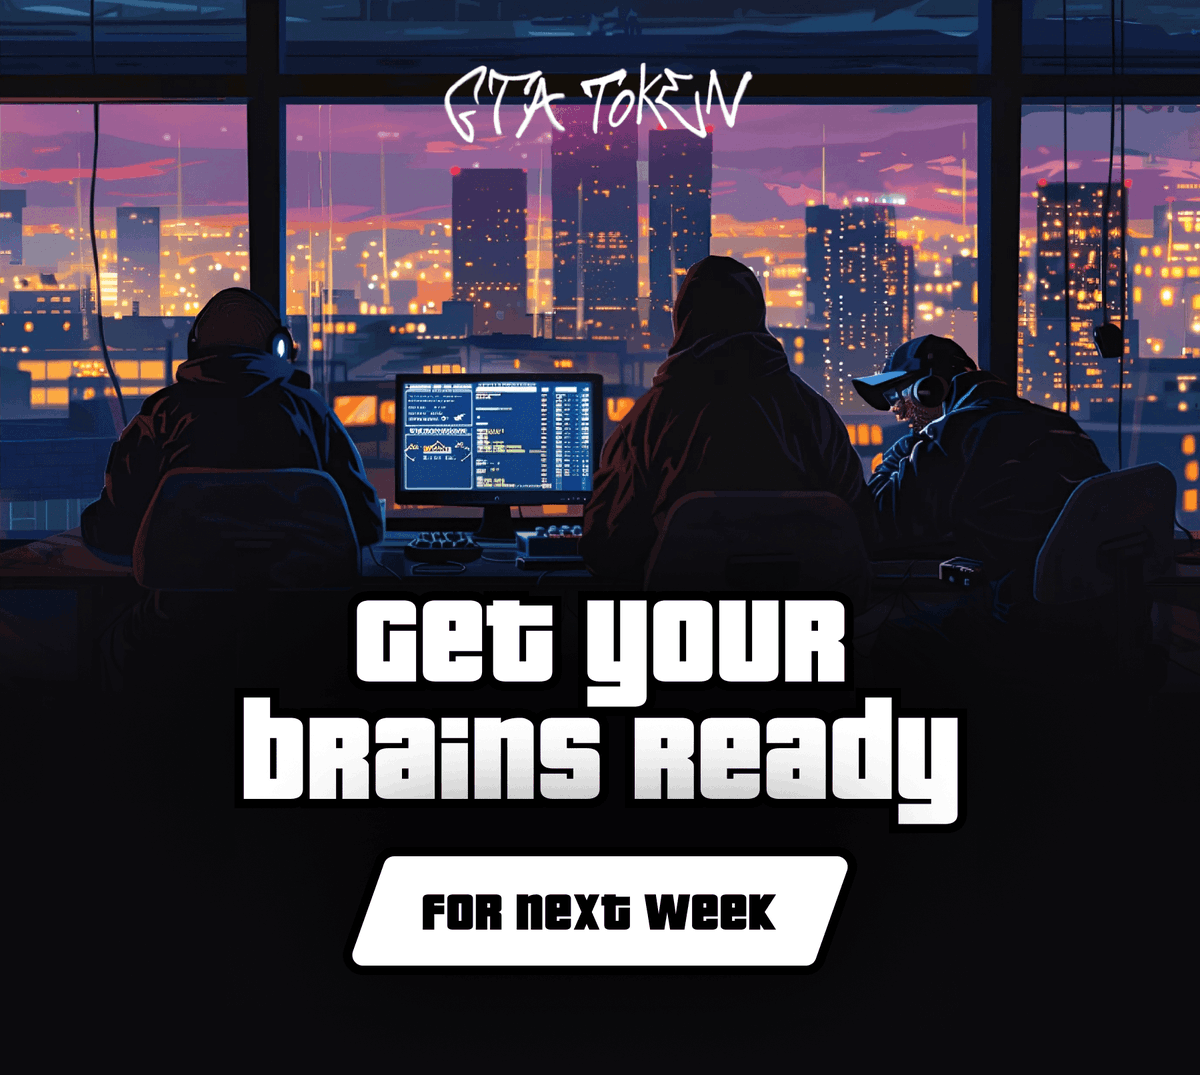 Evening, gang!

This week was pretty hectic for our fam! Ready to give your brain a workout?

We’ve got something amazing brewing for next week. 

It’s going to be a flash competition! So, stay tuned and check our socials daily — you don’t want to miss this 😎